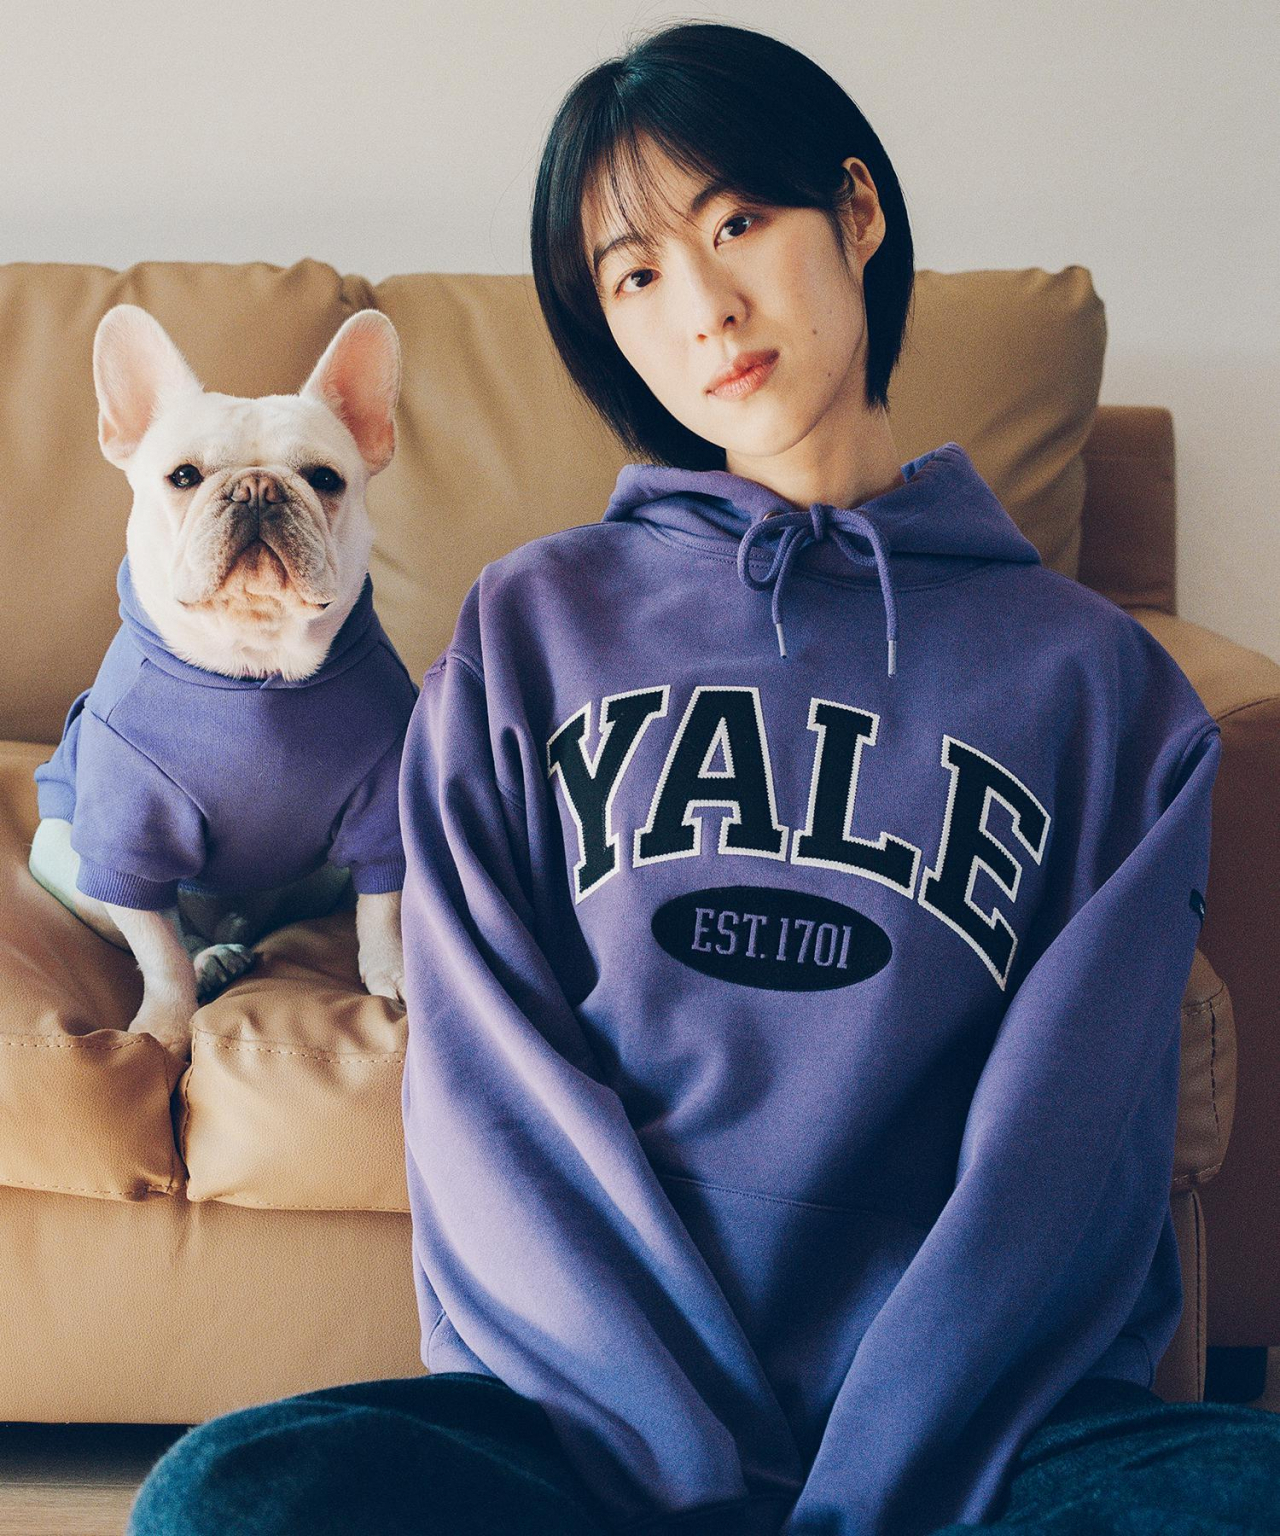 A model wearing Yale's hooded sweatshirt poses for a photo with a dog. (PHYPS Department)